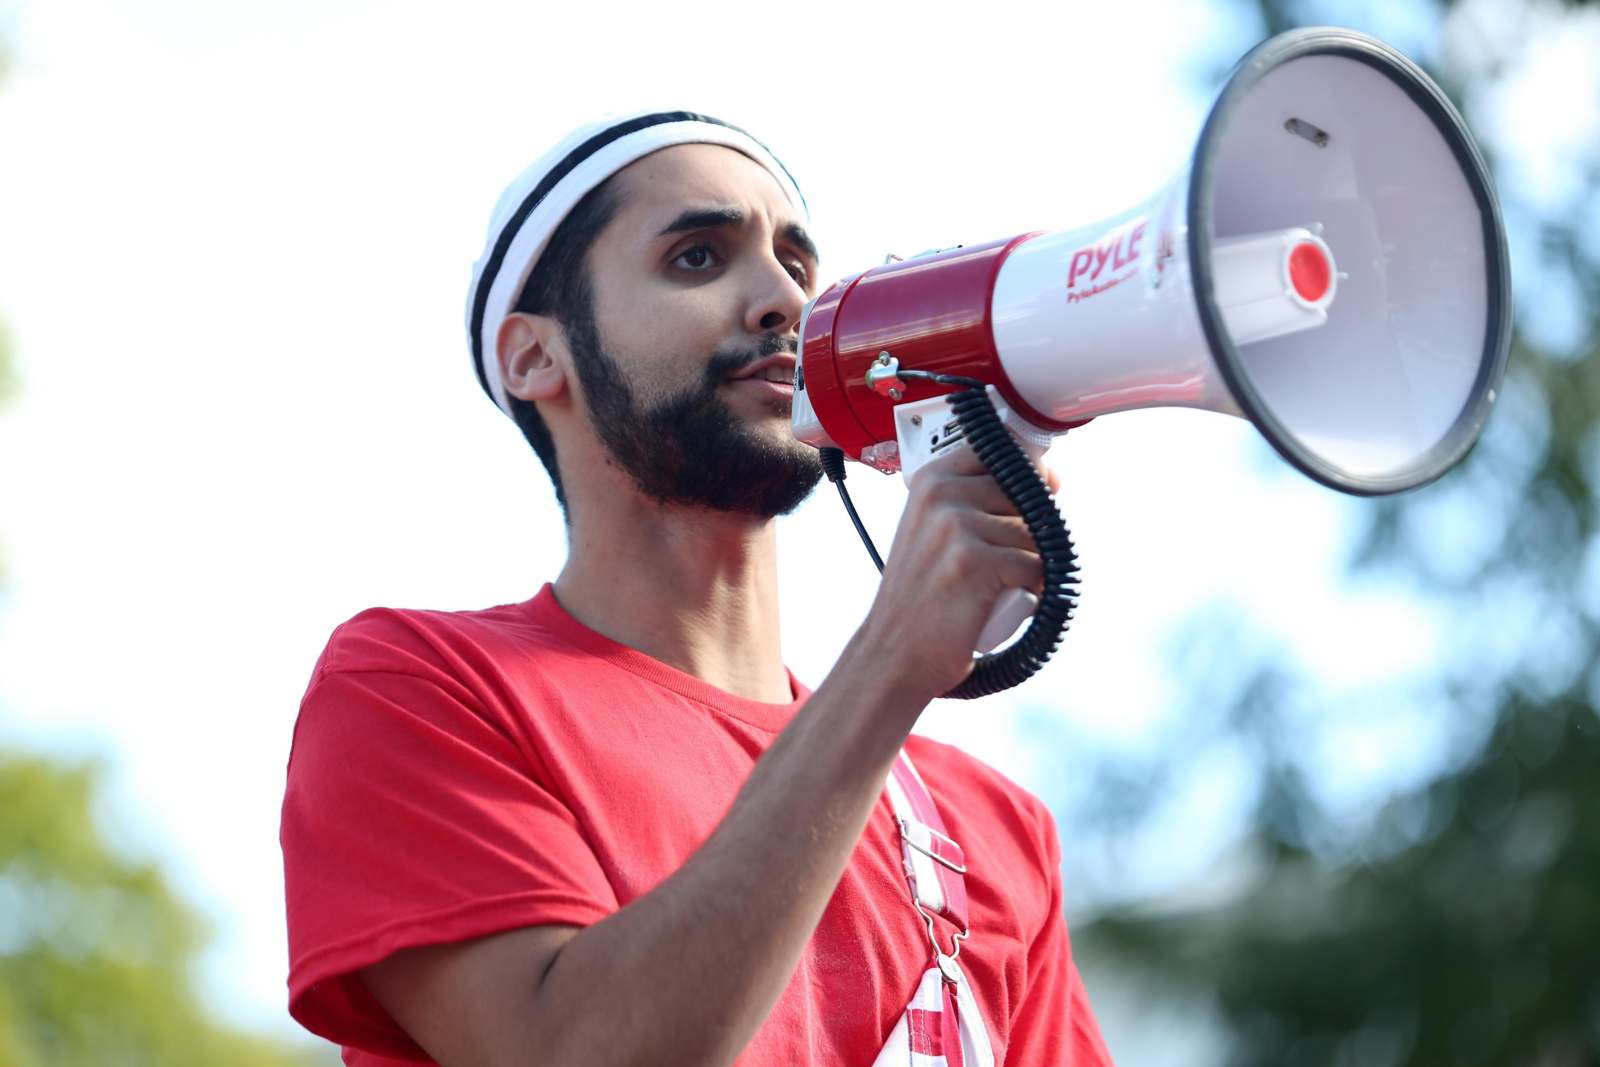 a man with a beard speaking into a megaphone